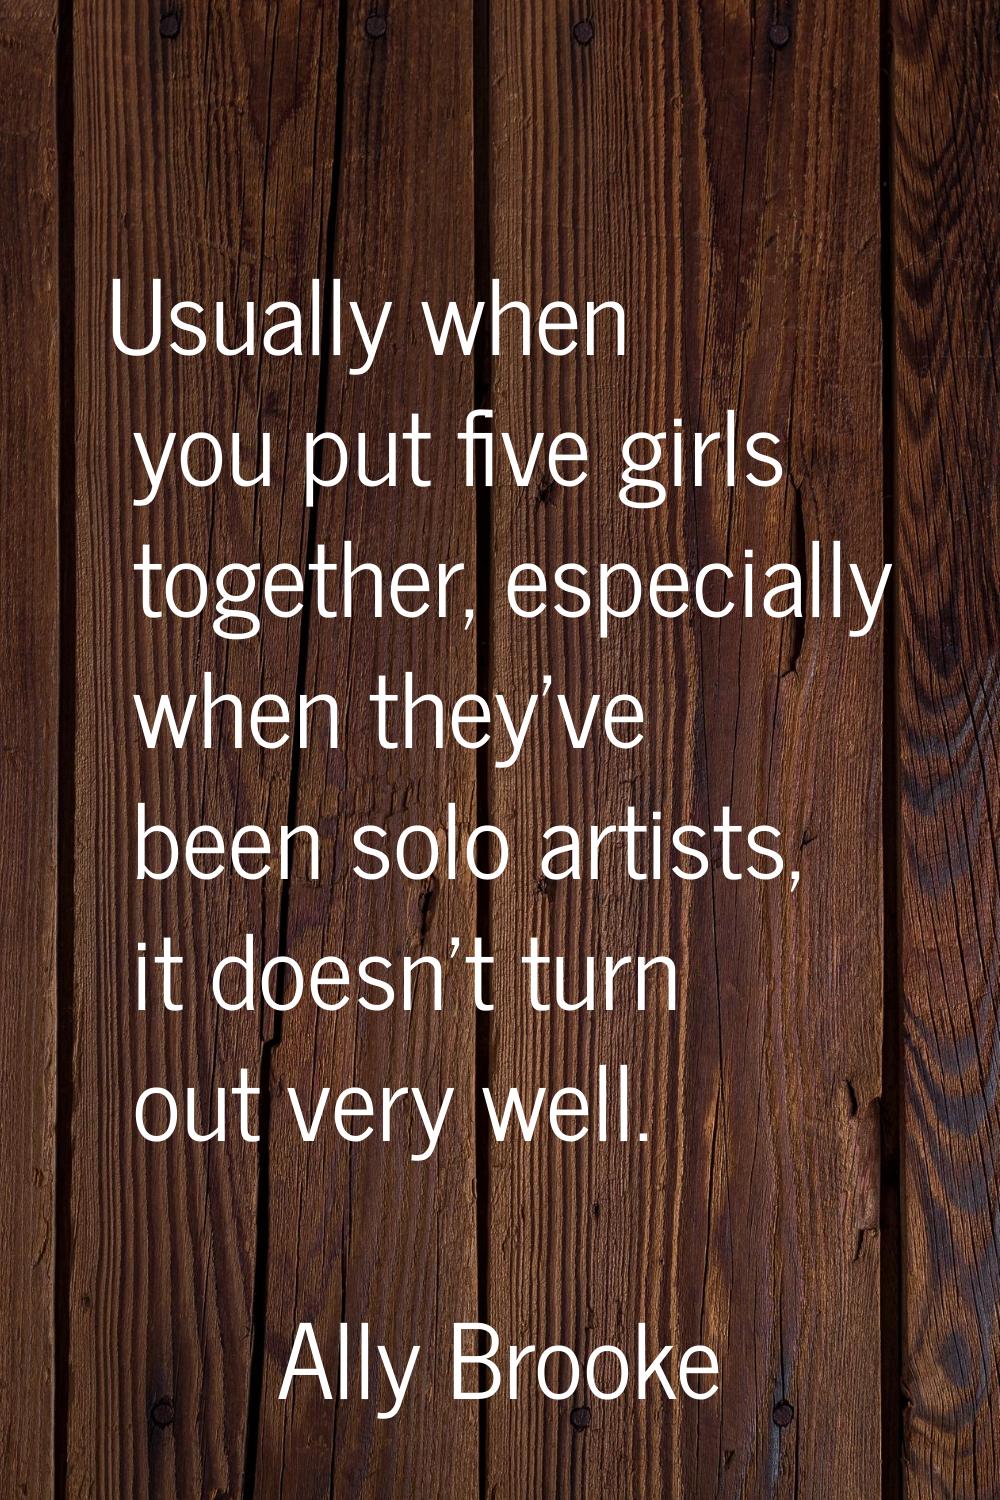 Usually when you put five girls together, especially when they've been solo artists, it doesn't tur